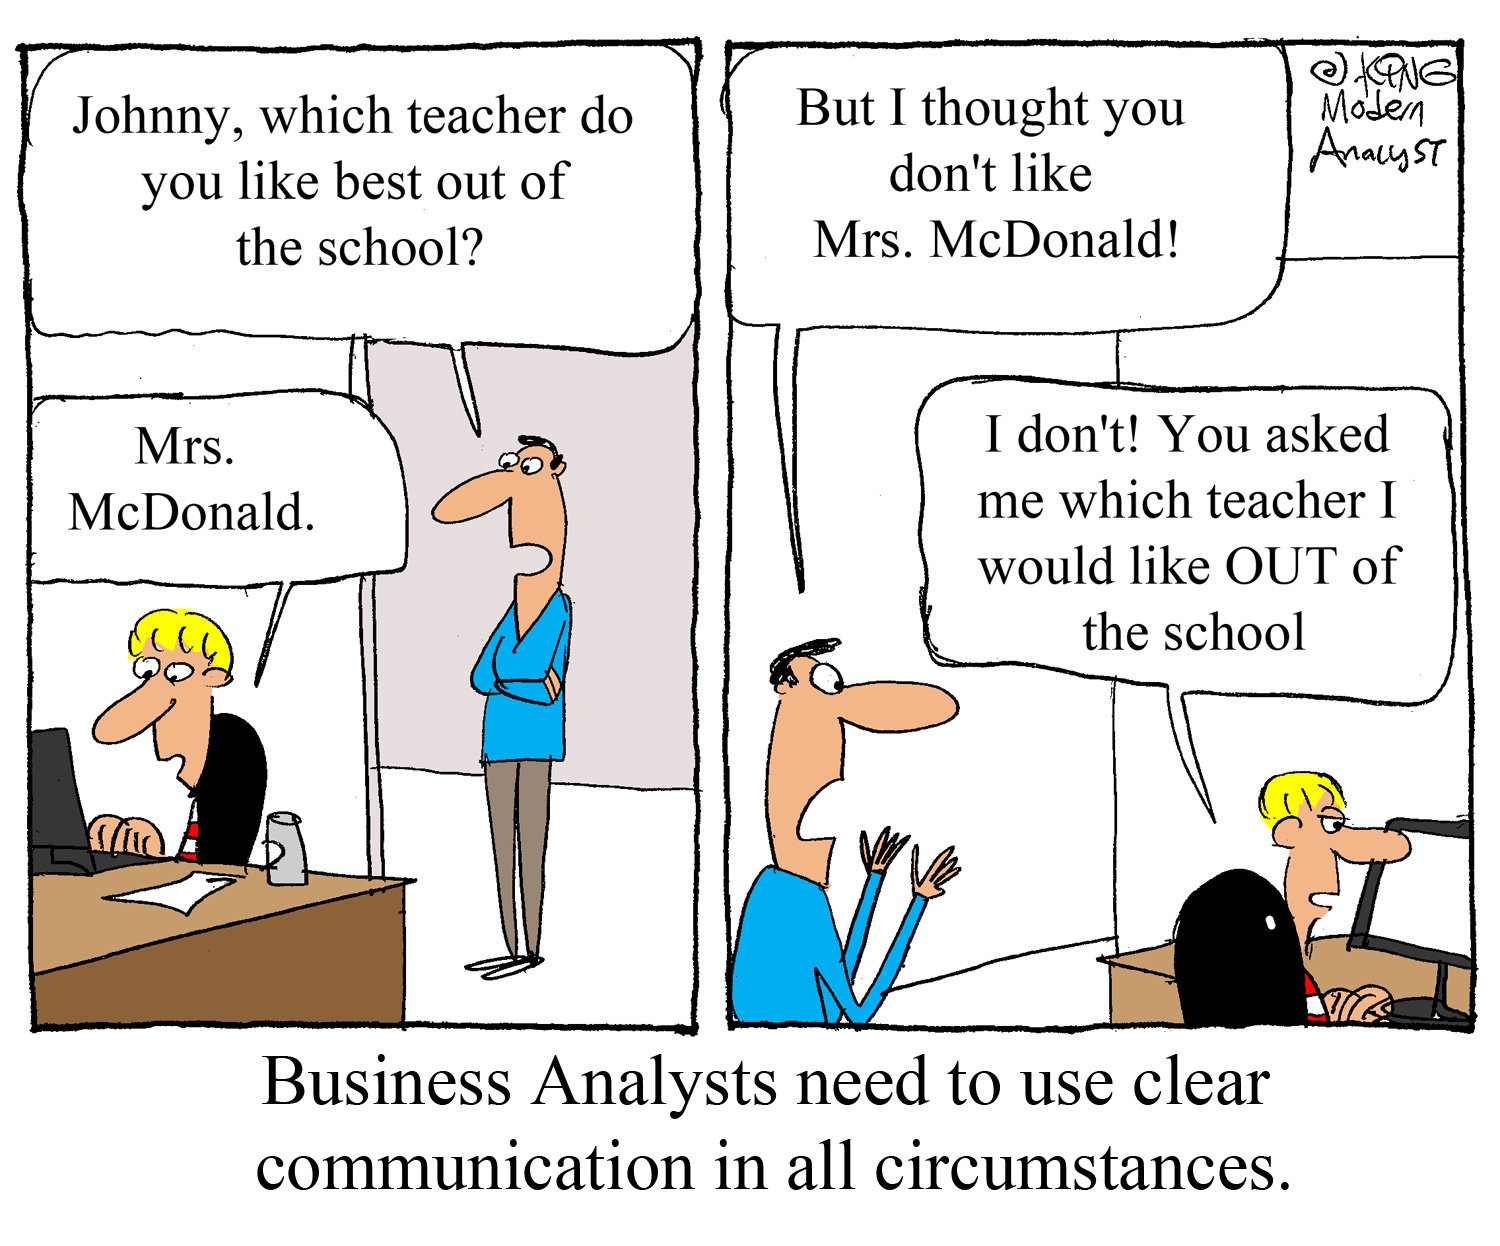 Humor - Cartoon: Business Analysts Need to Use Clear Communication - Always